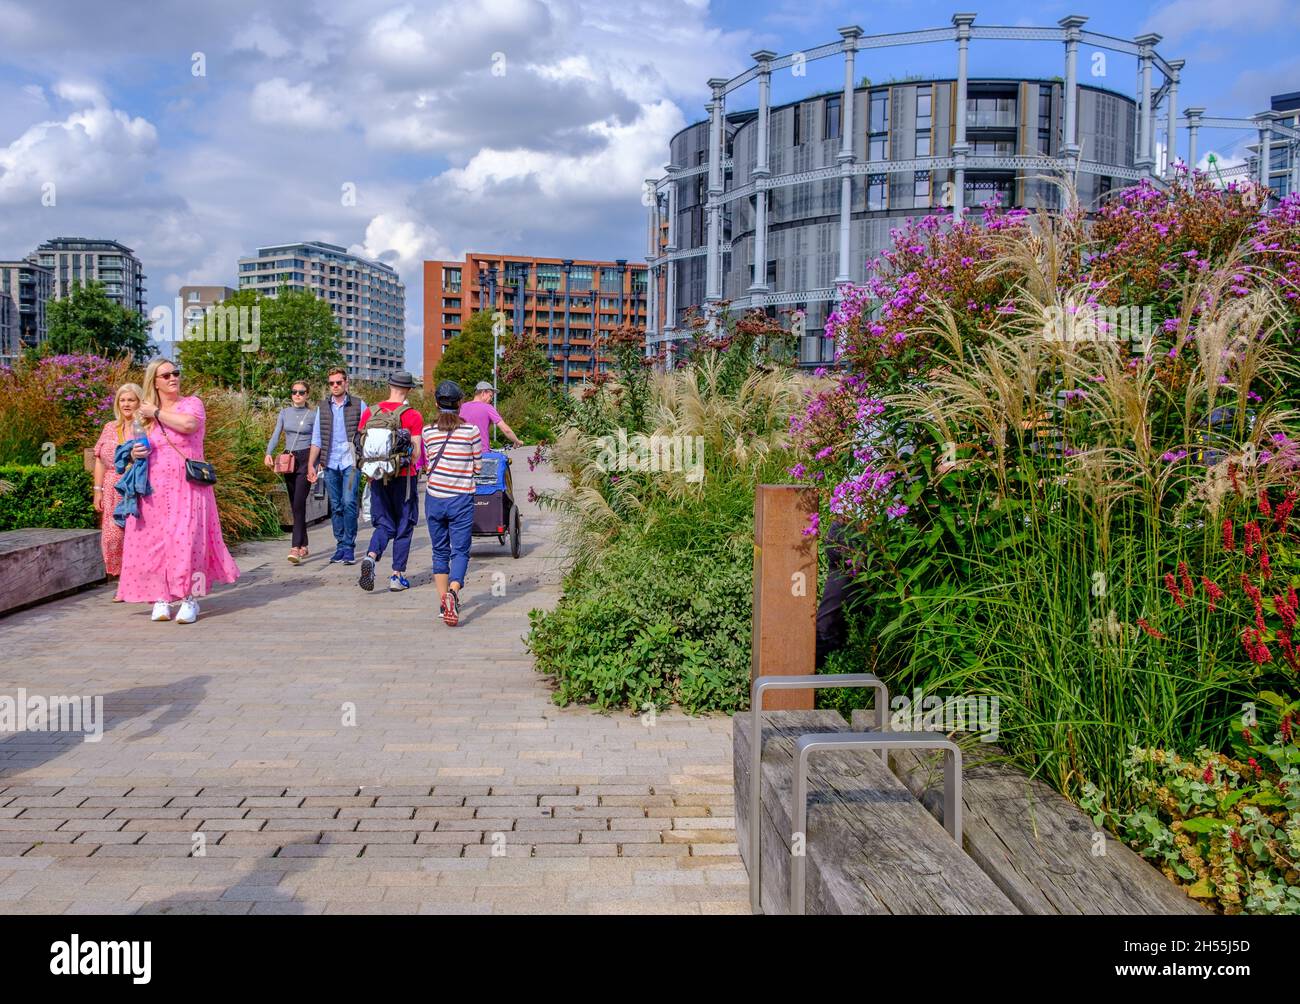 People walking on Bagley Walk an elevated park built on an old railway viaduct at King’s Cross, London with tall buildings in background. Stock Photo